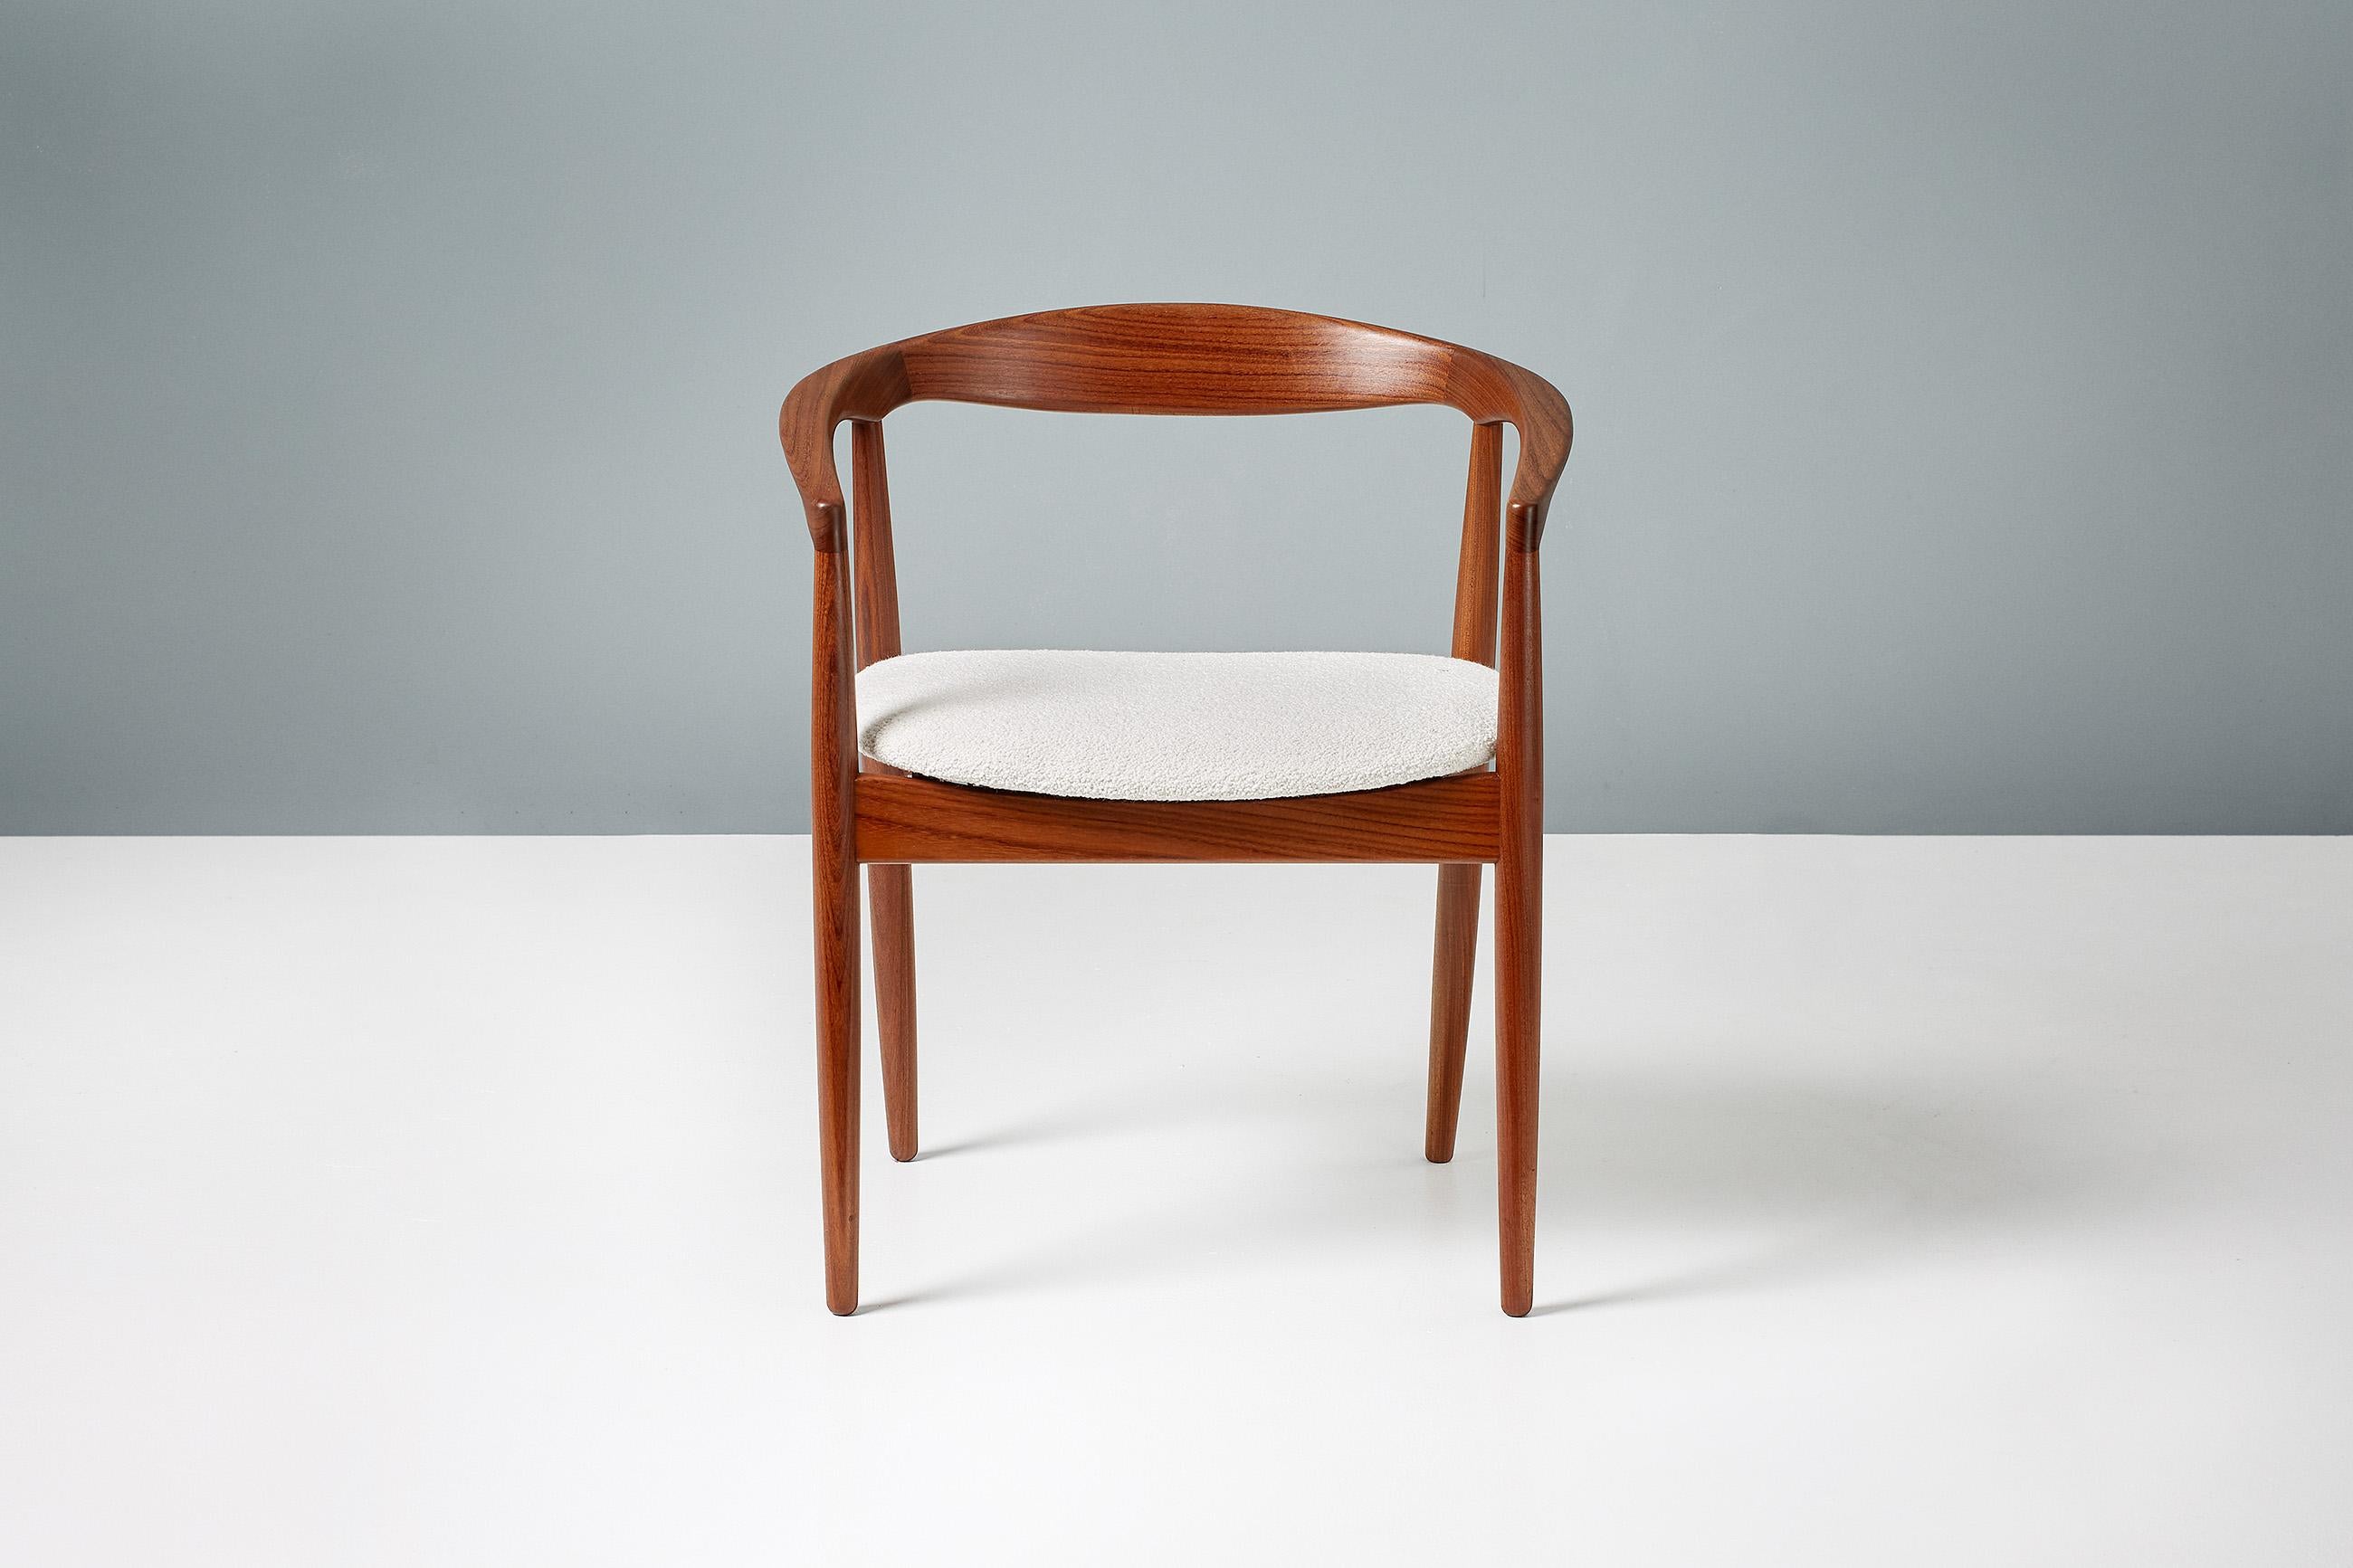 Kai Kristiansen 'Troja' round chair from circa 1960. The frame is made from Afromosia African teak wood. The seat has been reupholstered in premium cotton-wool blend ivory boucle fabric.